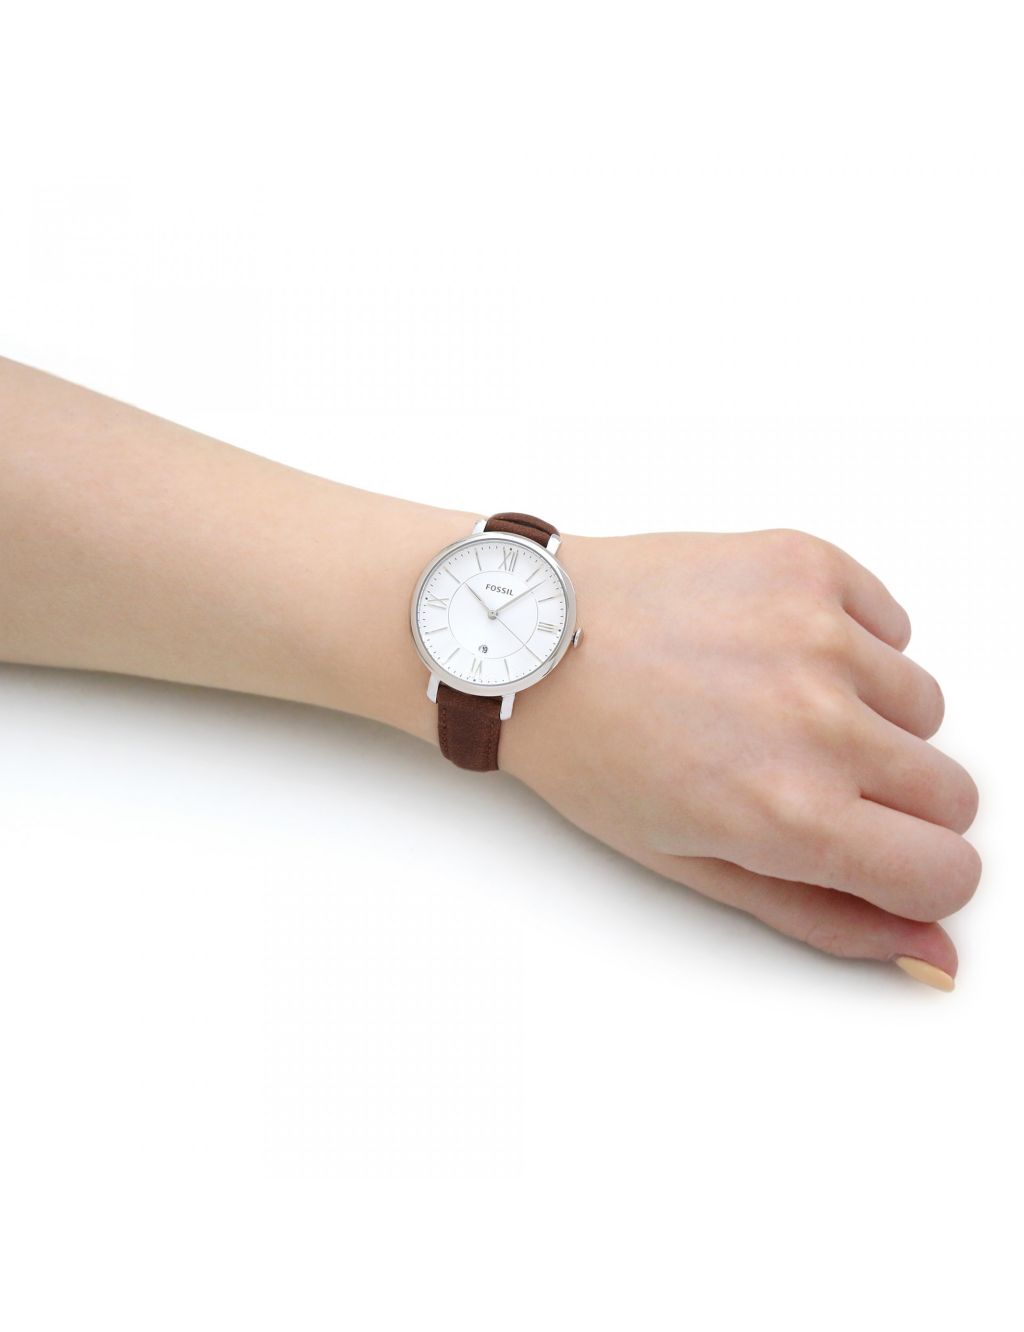 Fossil Jacqueline Brown Leather Watch image 2